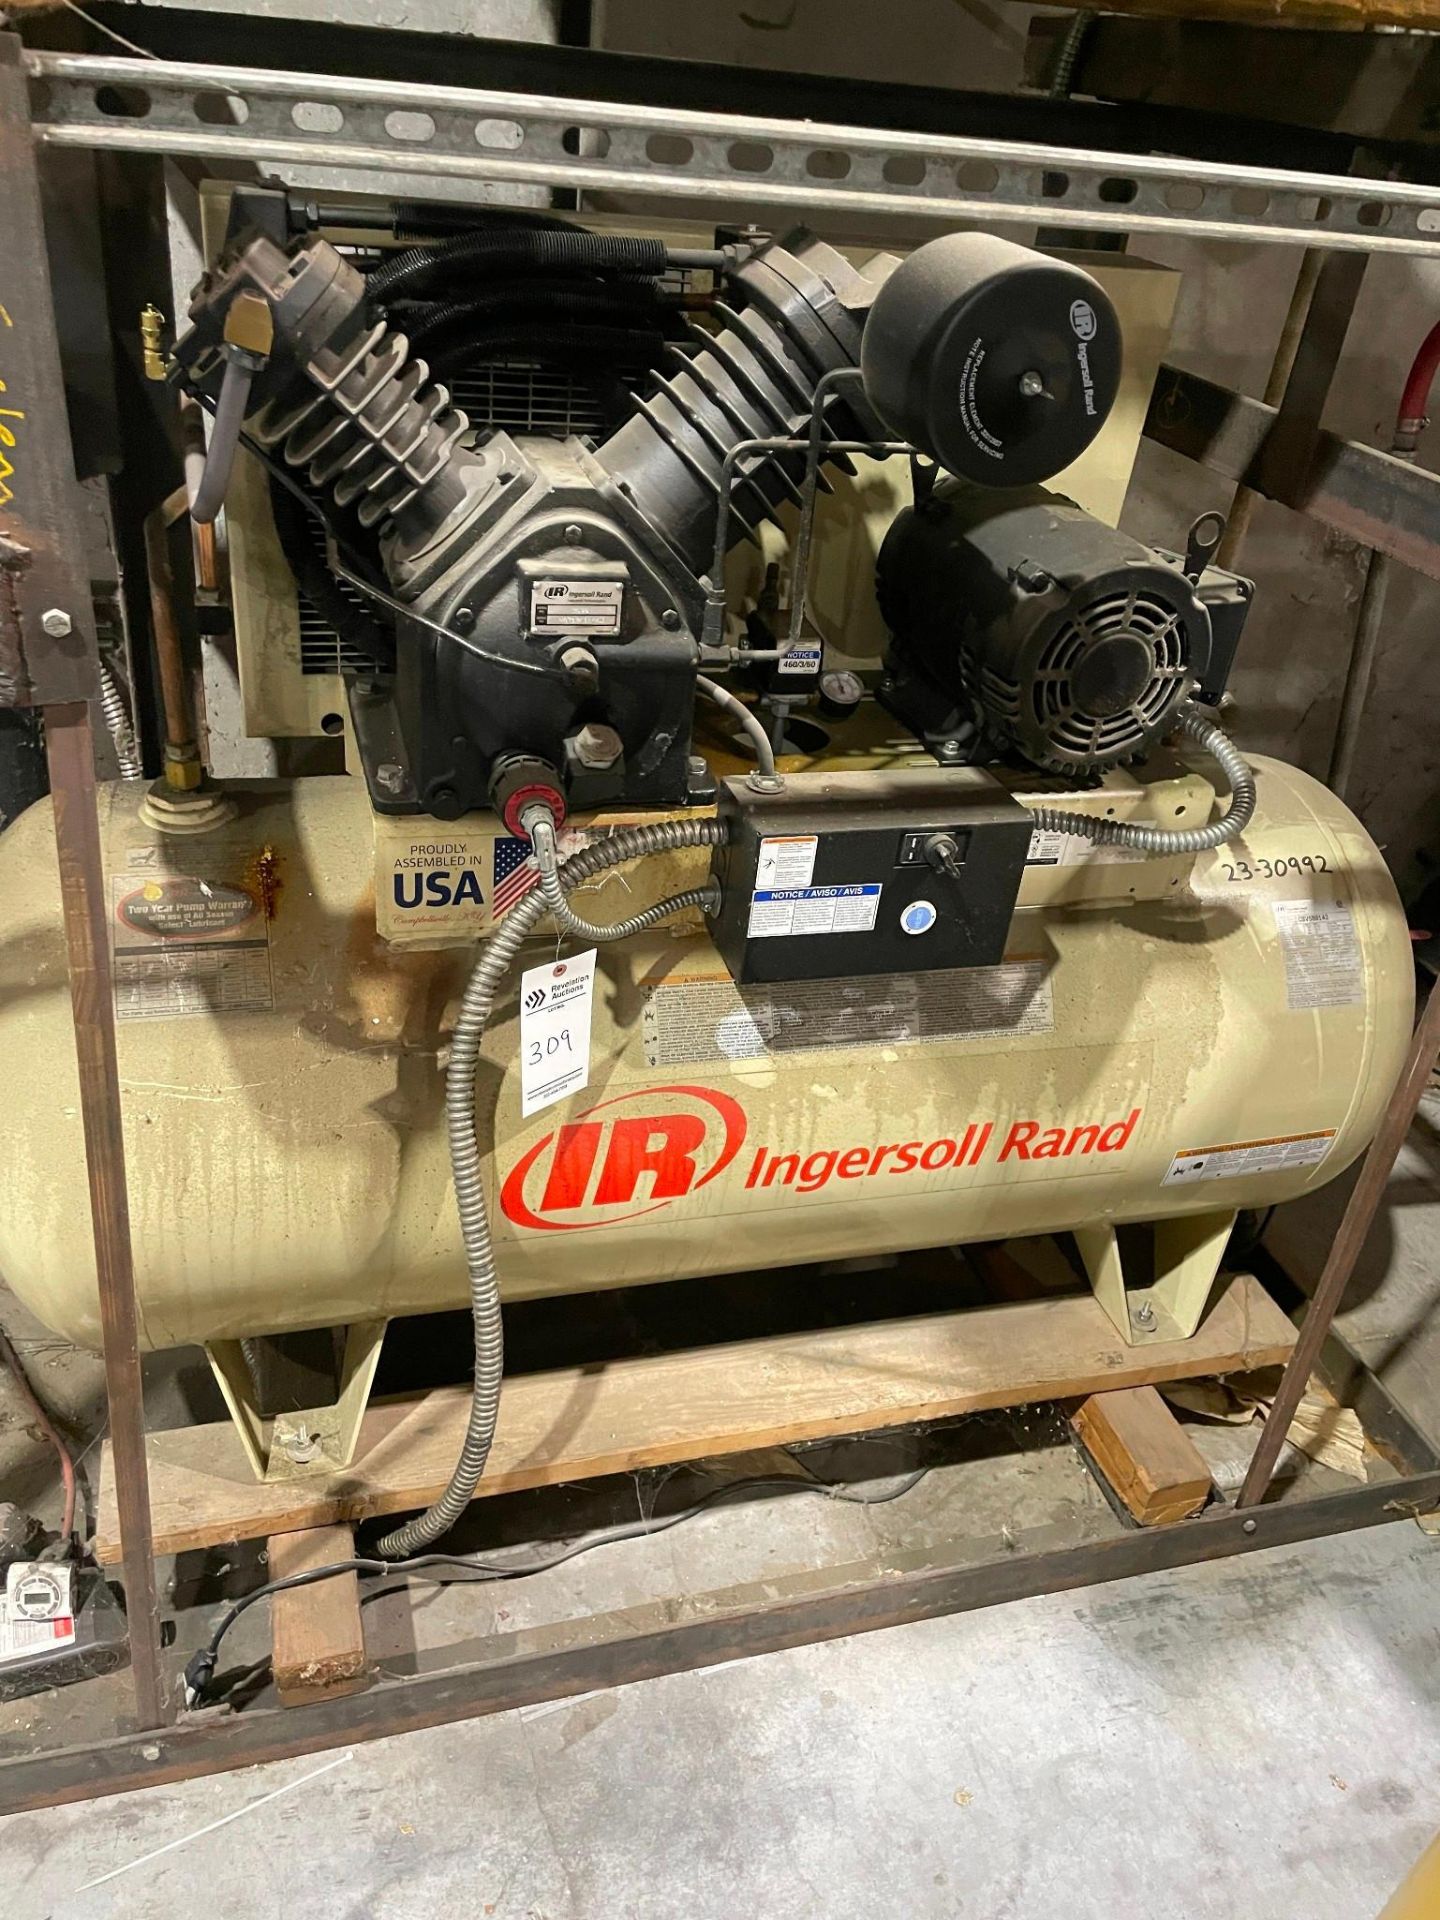 INGERSOLL RAND 2545 10 HP 120G AIR COMPRESSOR - Image 13 of 13